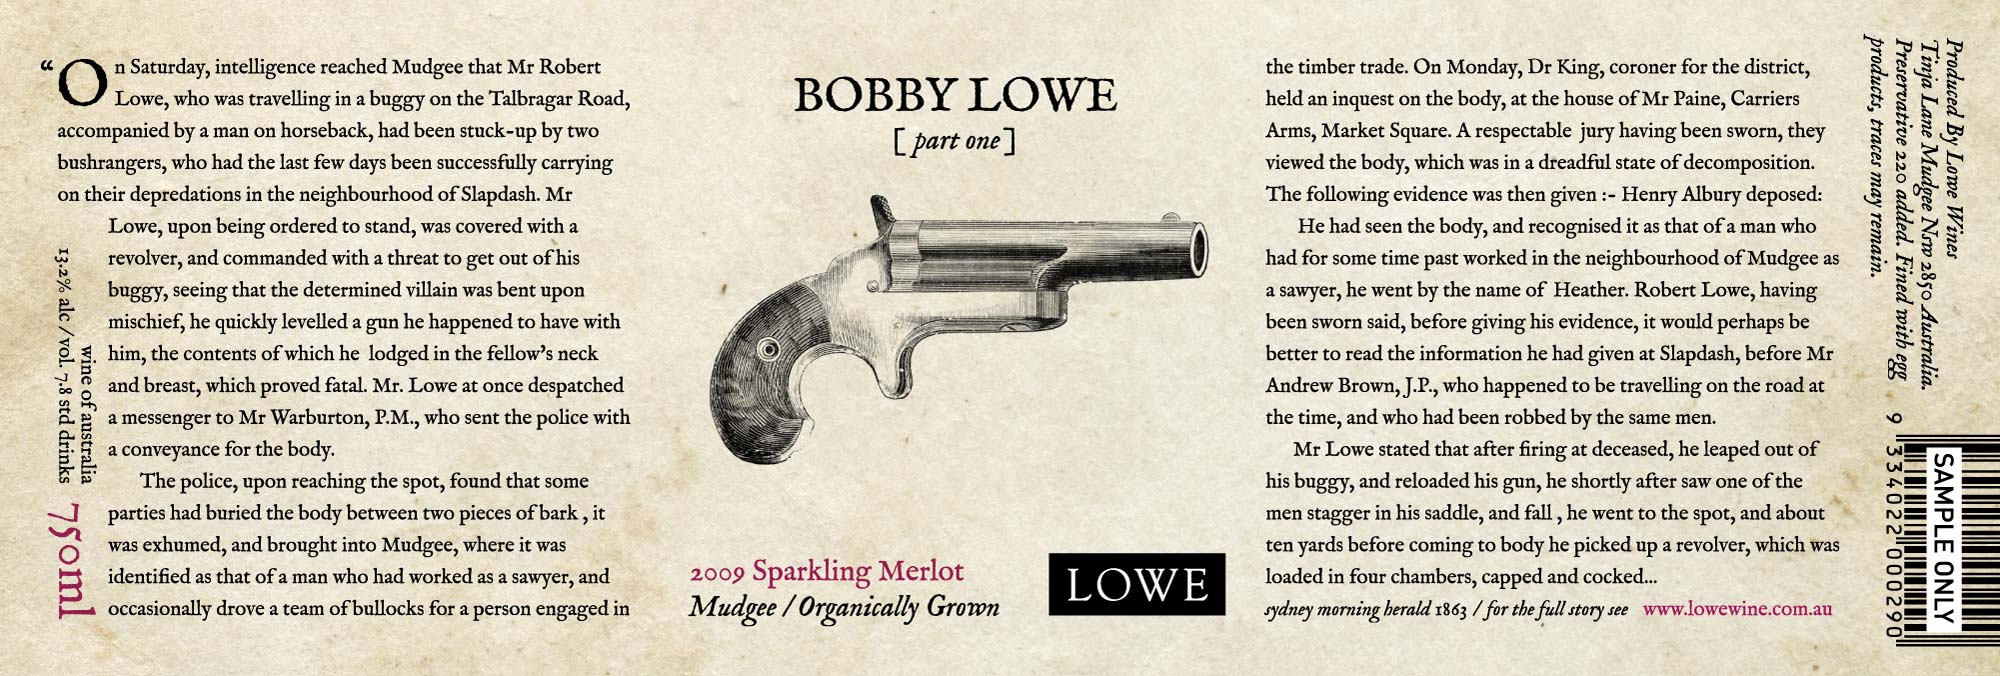 Lowe Bobby Lowe Part One Label Design